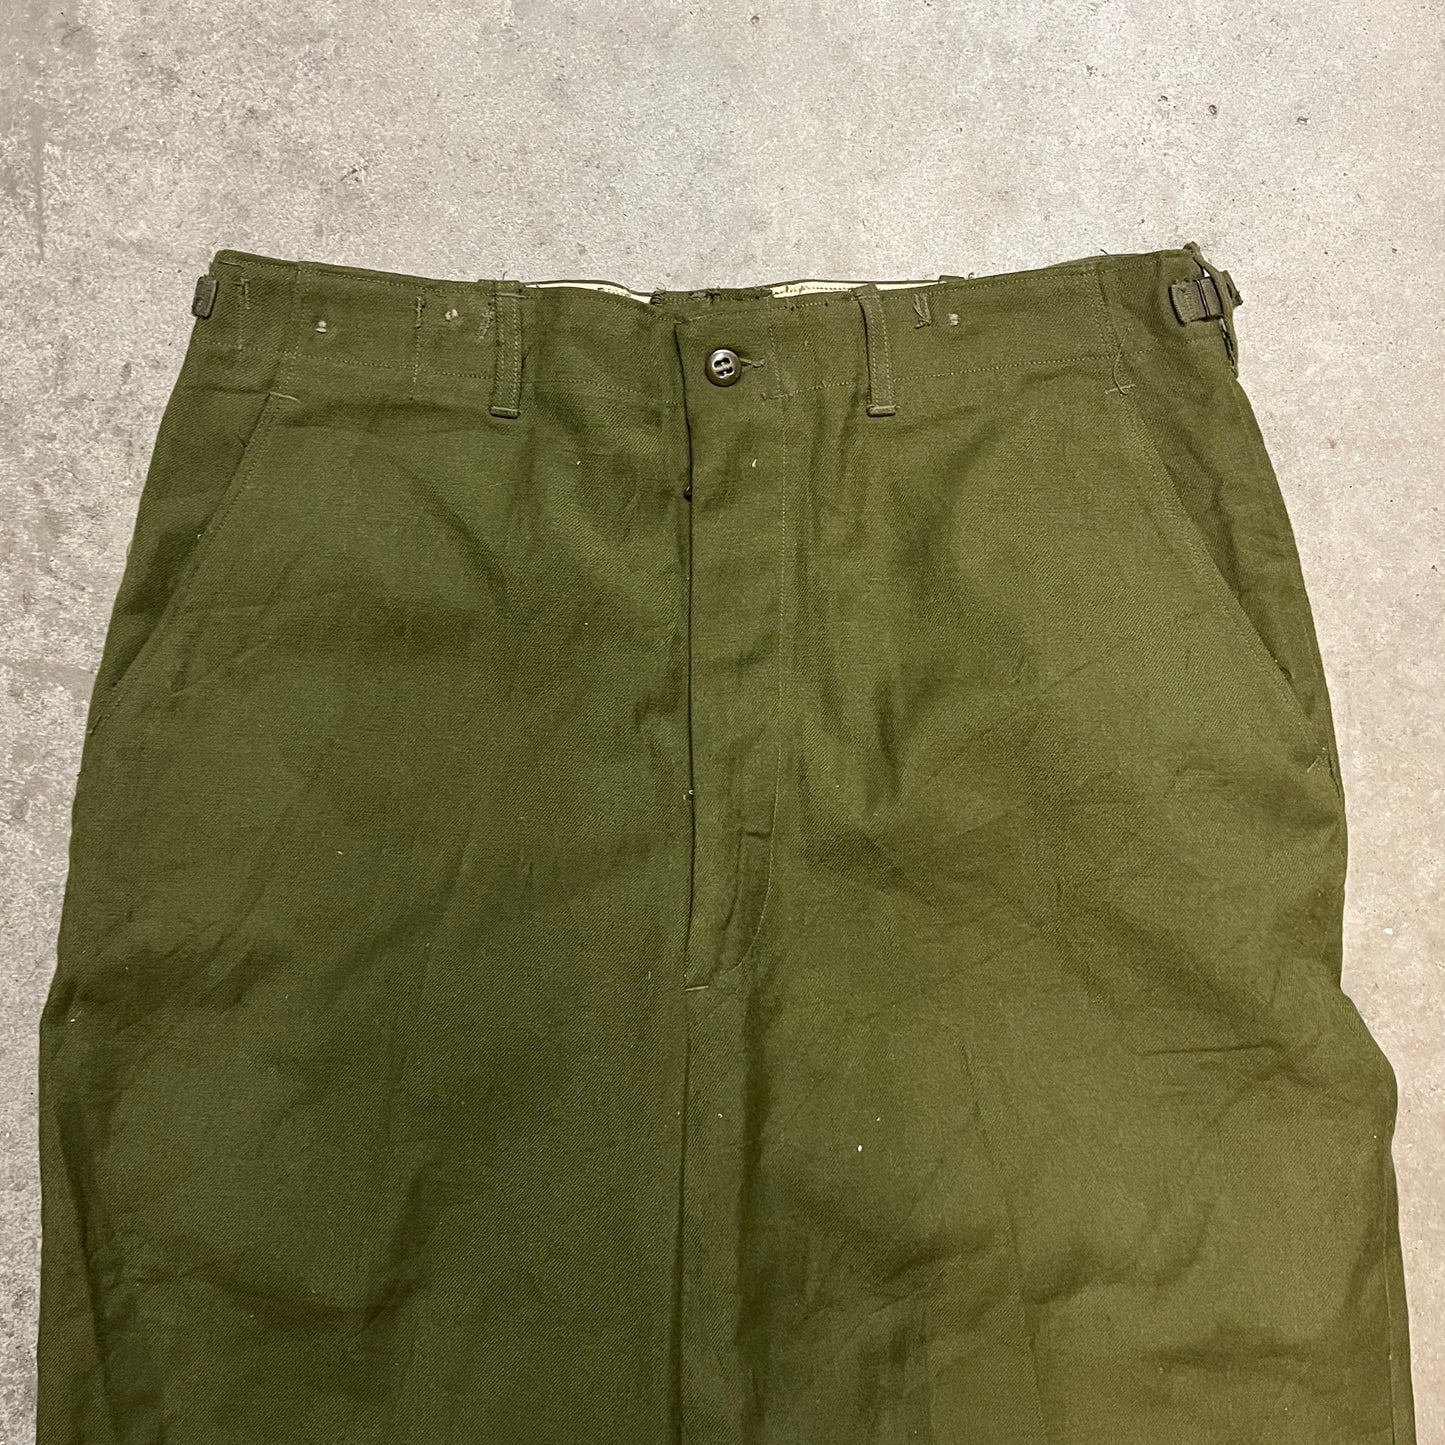 1950s US Army M1951 Woolen Trousers